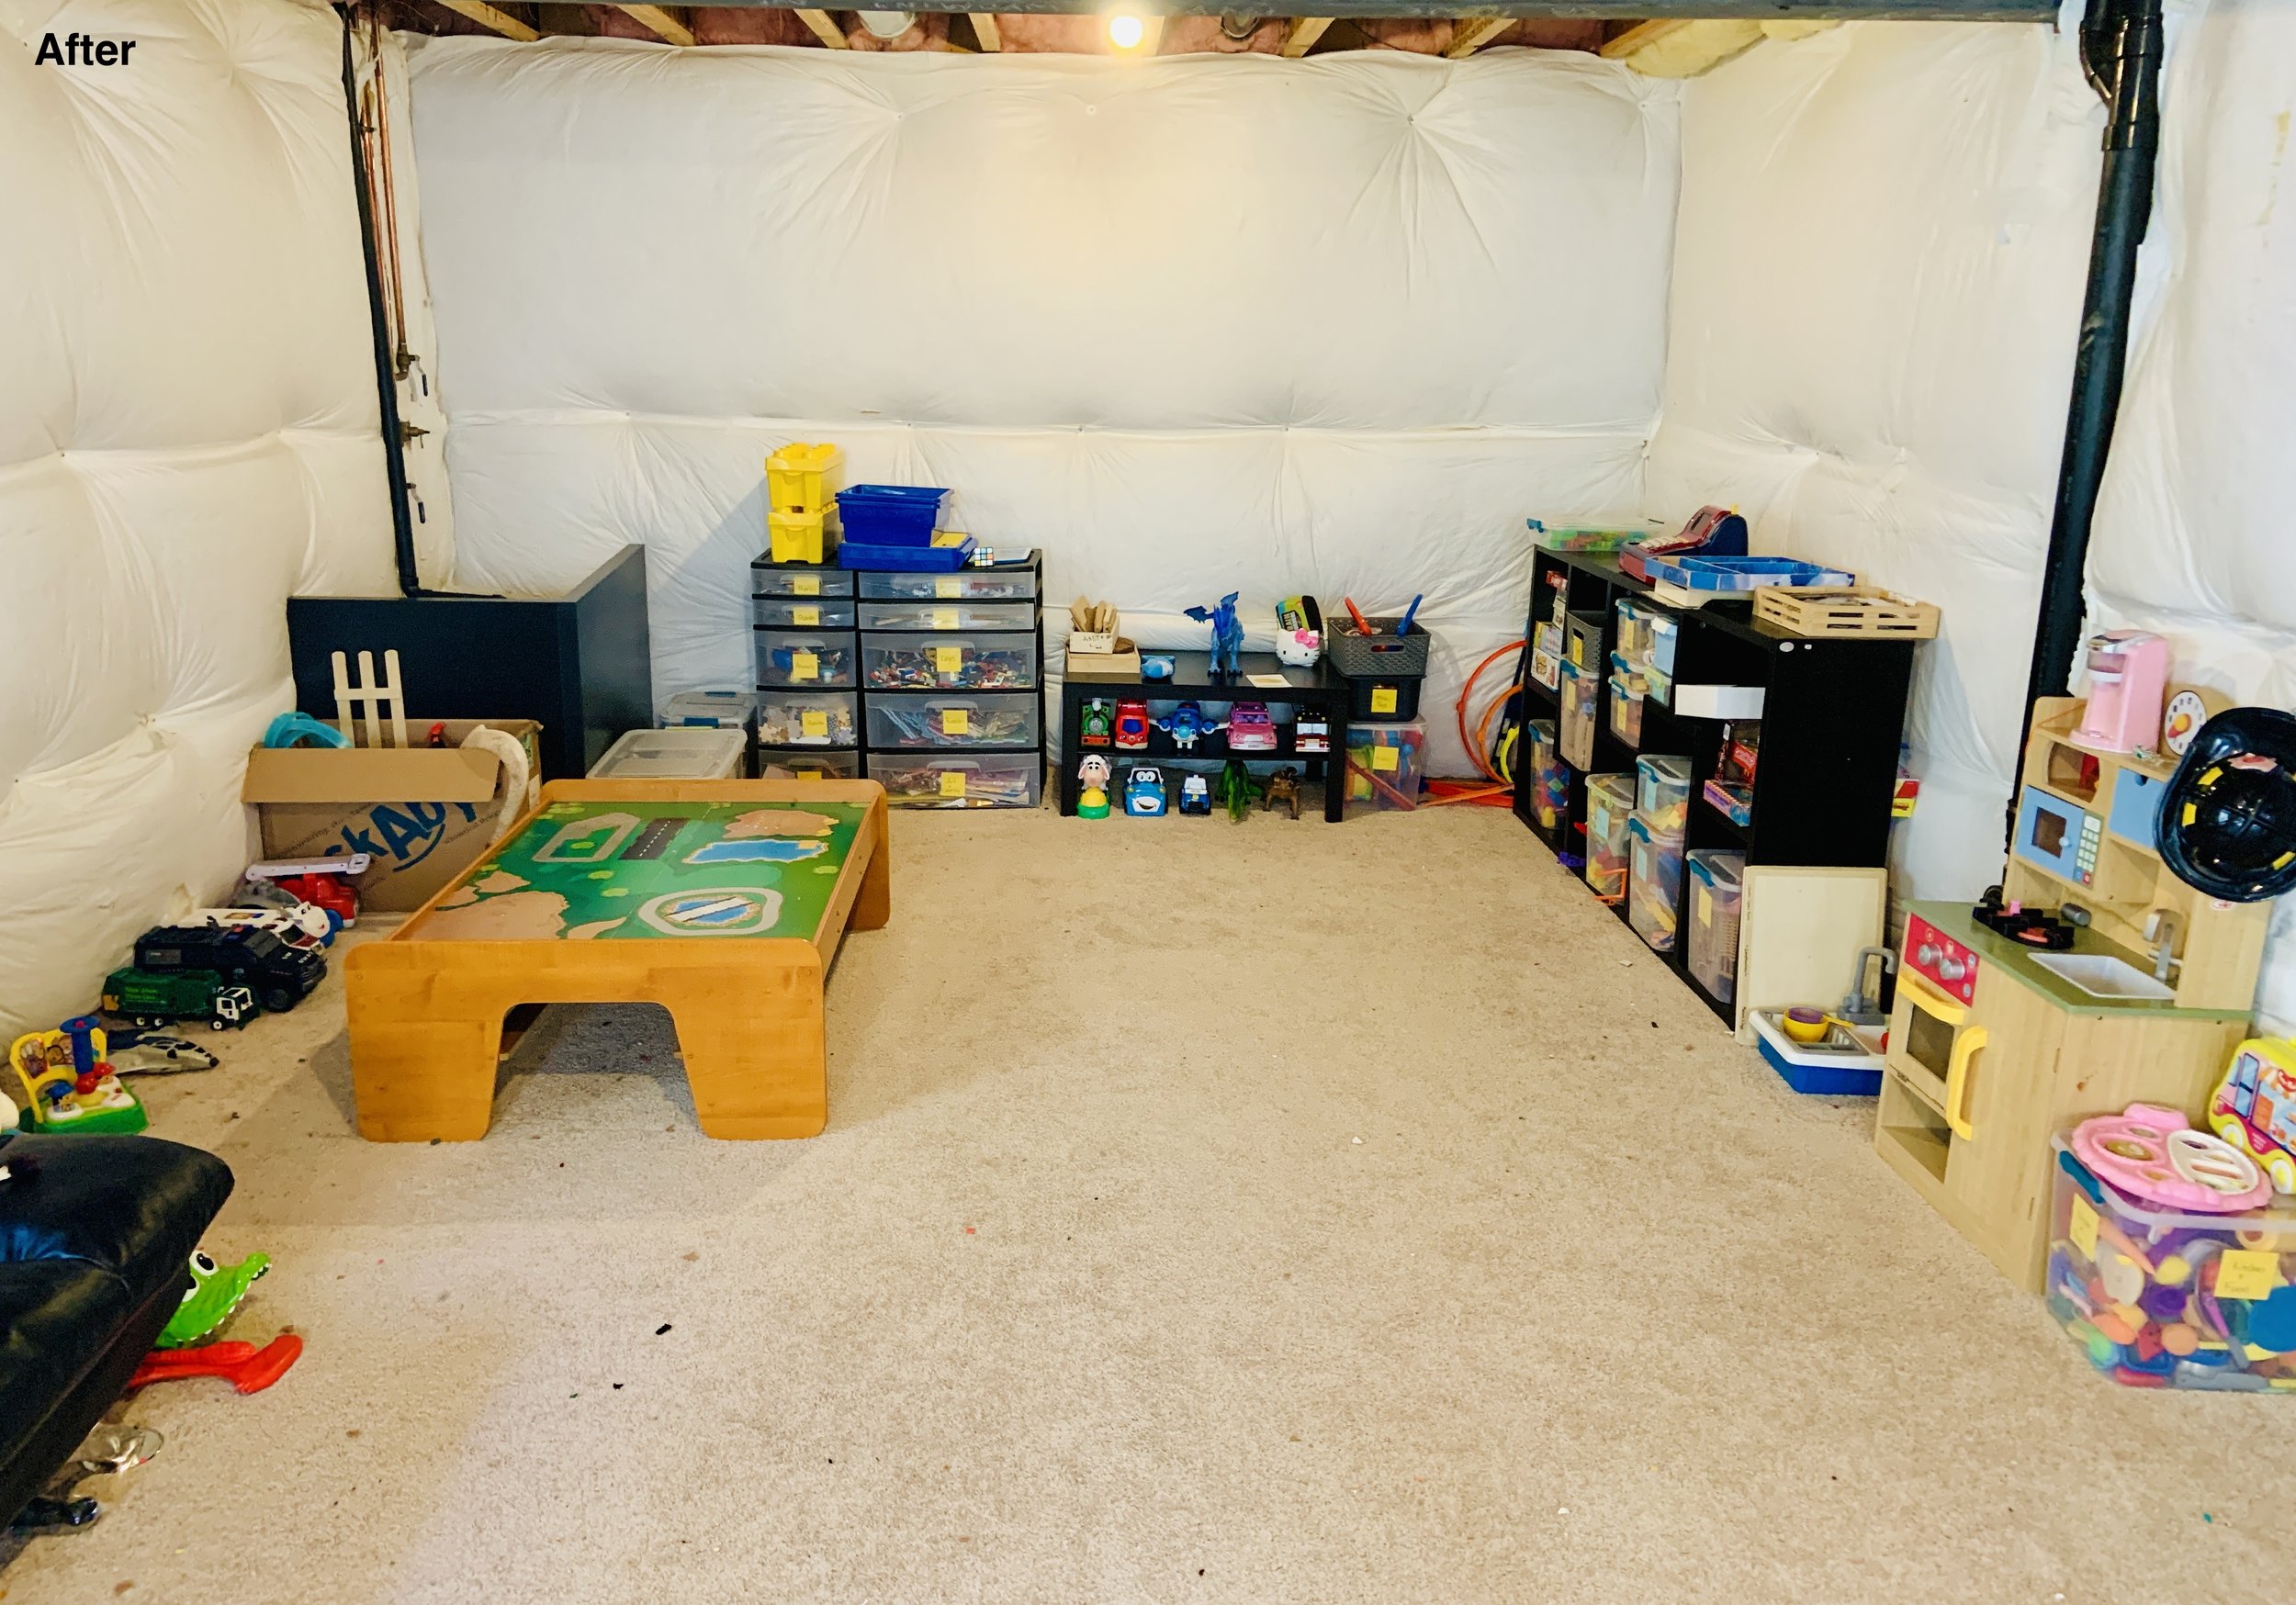 After photo of playroom with black shelving units with toys nearly organized and drawers labeled, floor is open and useable.